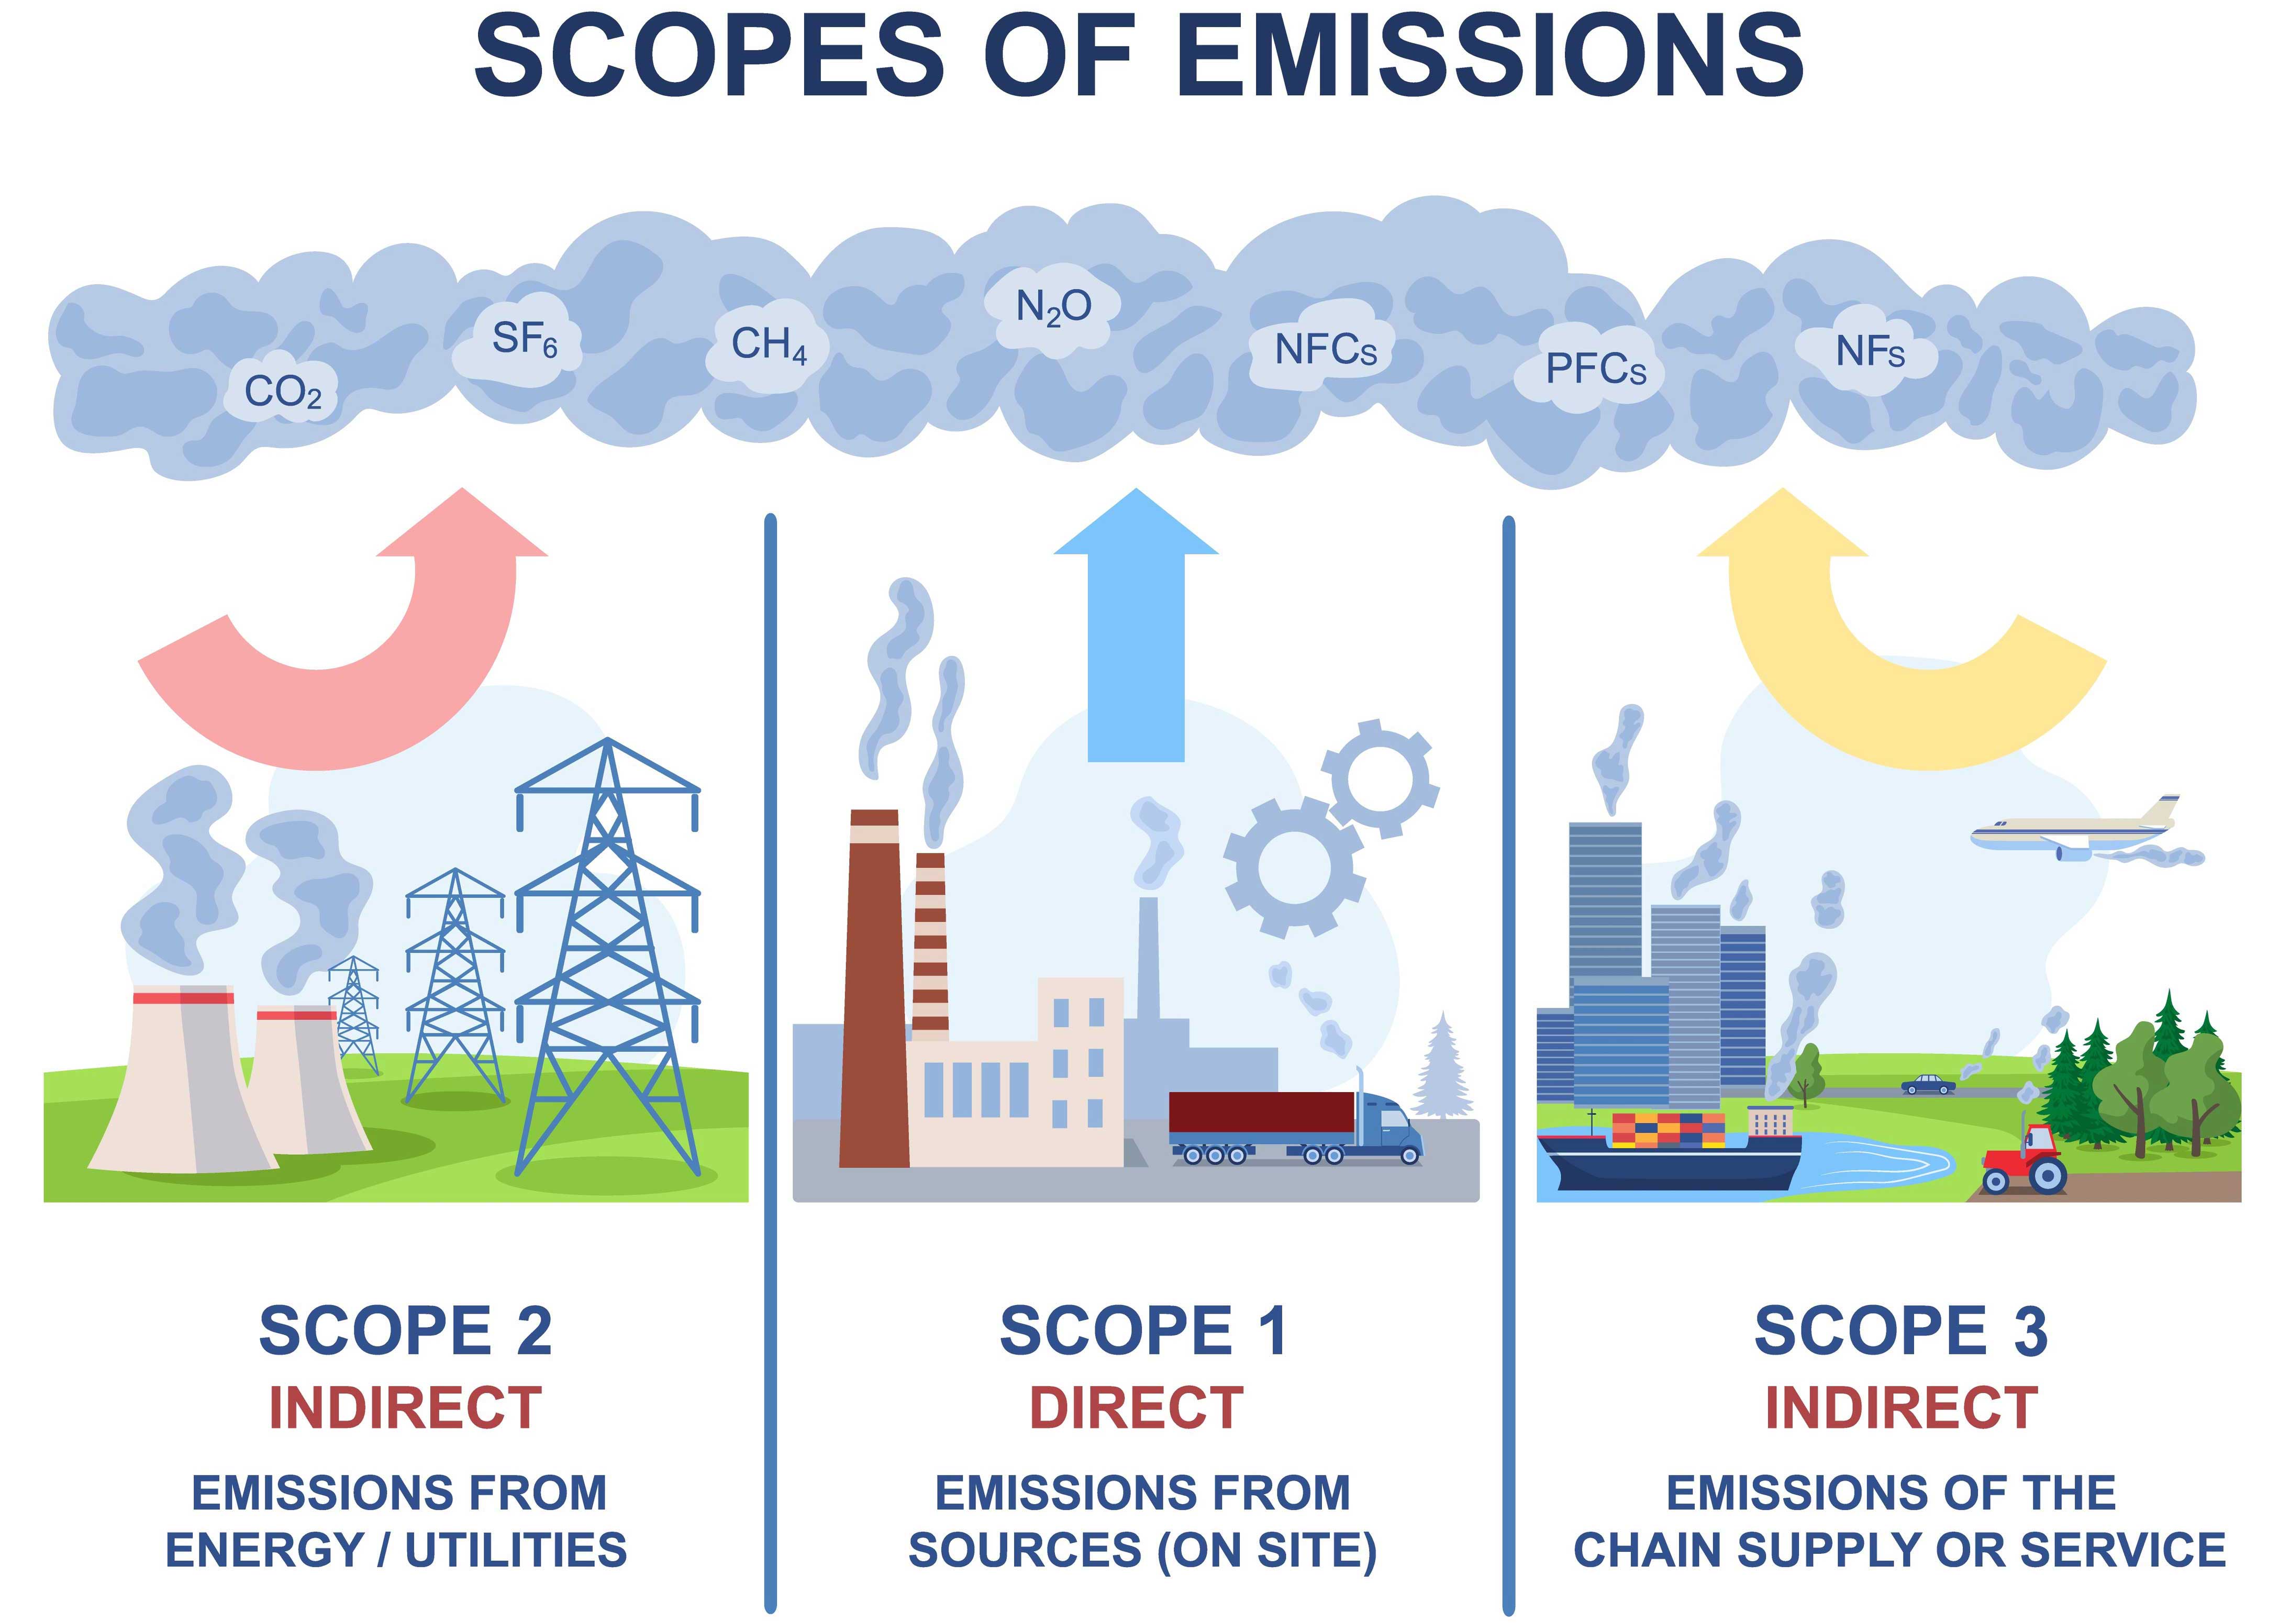 Scopes of Emissions. Scope 1: Direct. Emissions from sources (on site). Scope 2: Indirect. Emissions from energy/utilities. Scope 3: Indirect. Emissions of the chain supply or service.